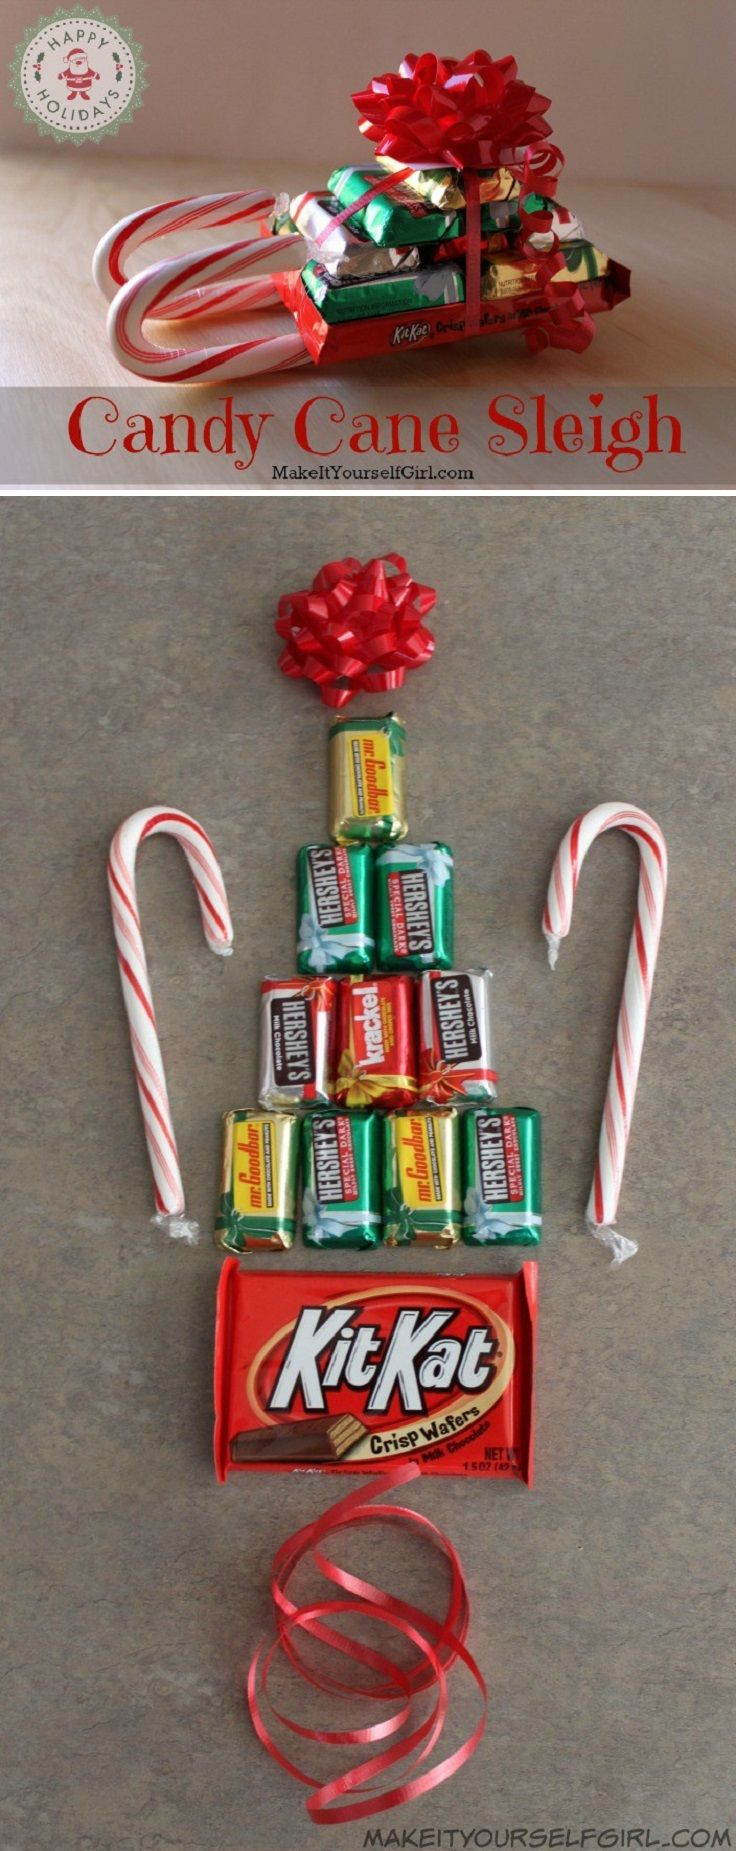 Christmas Candy Crafts
 Simple DIY Candy Cane Sleigh 12 Wondrous DIY Candy Cane